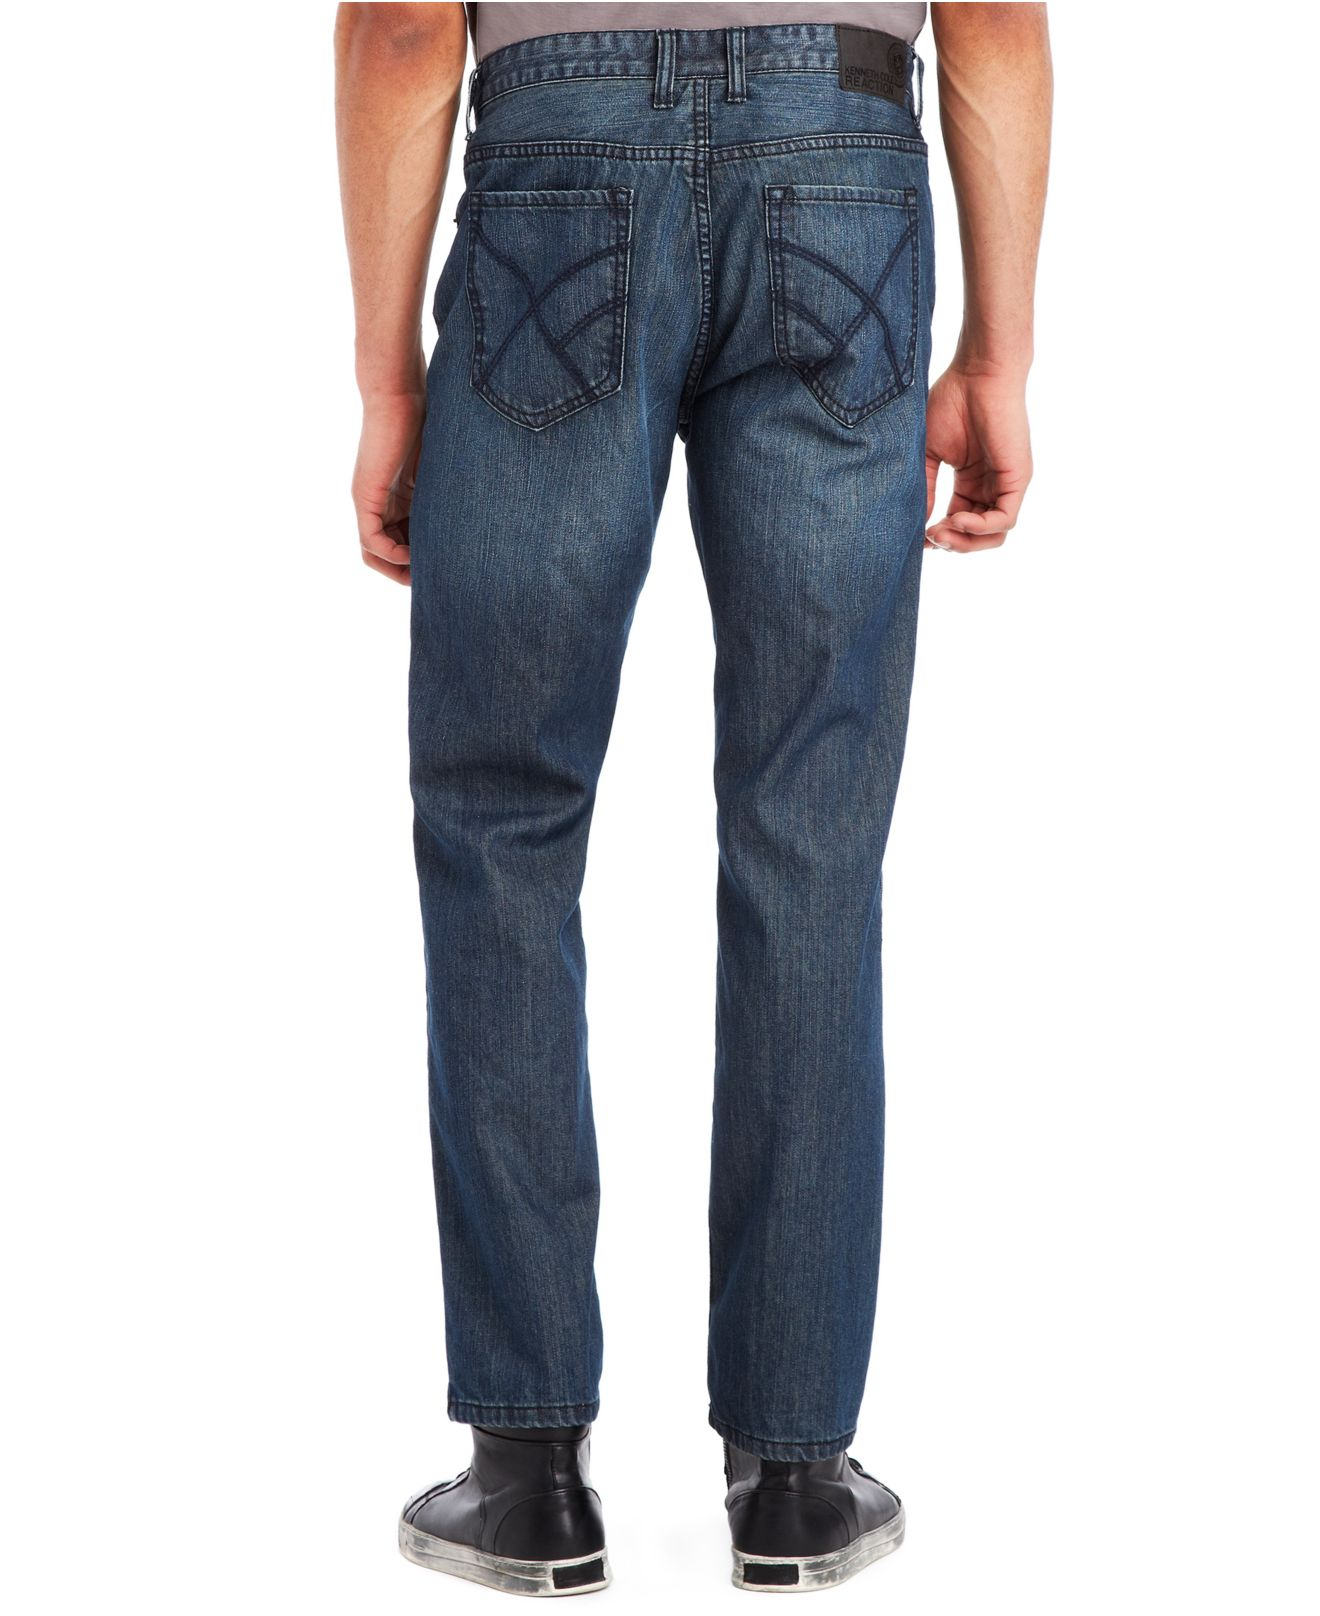 Lyst Kenneth Cole Reaction Relaxed Fit Jeans In Blue For Men 